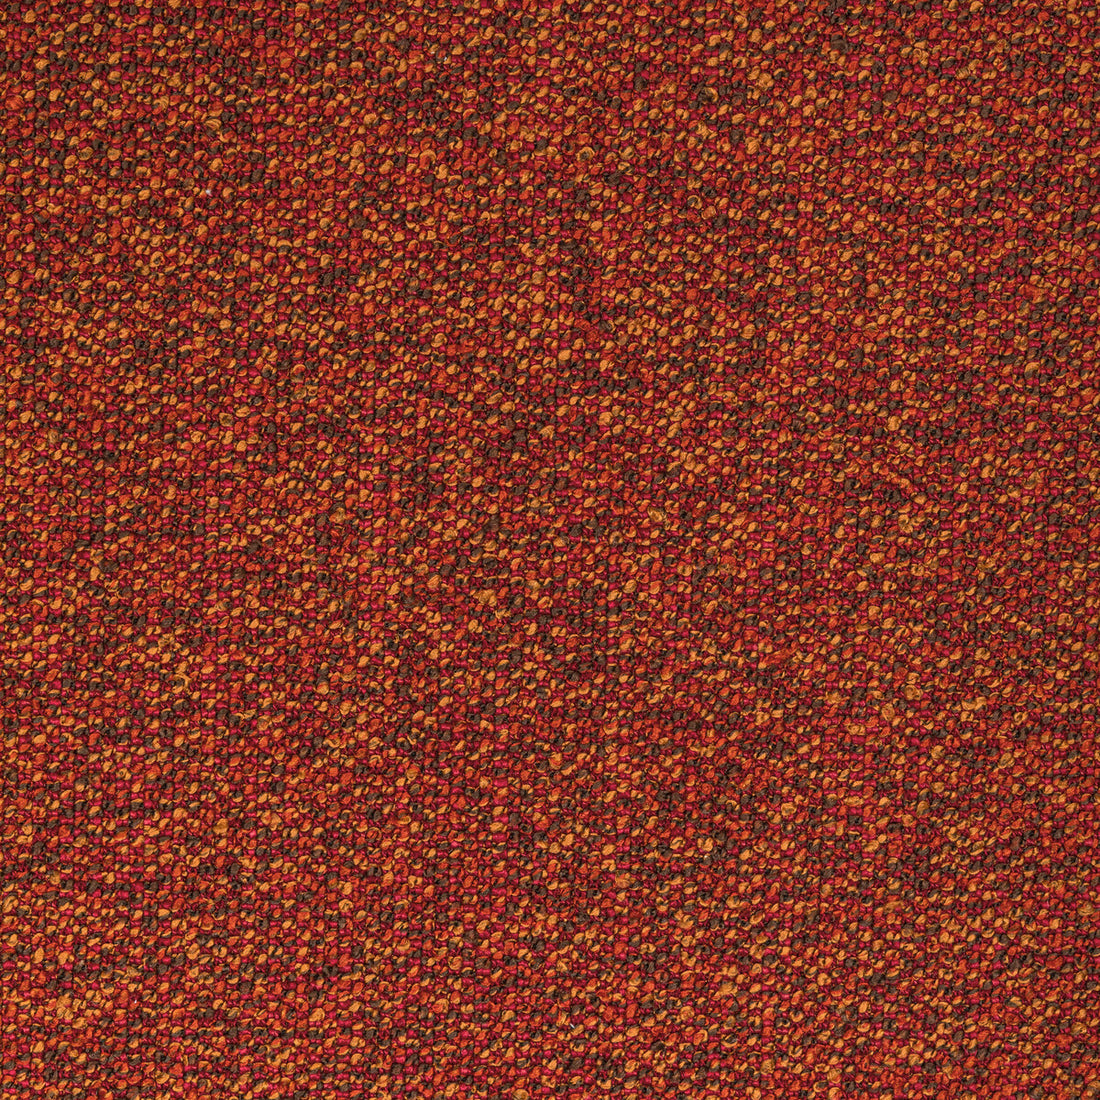 Mathis fabric in chili color - pattern 36699.924.0 - by Kravet Contract in the Refined Textures Performance Crypton collection